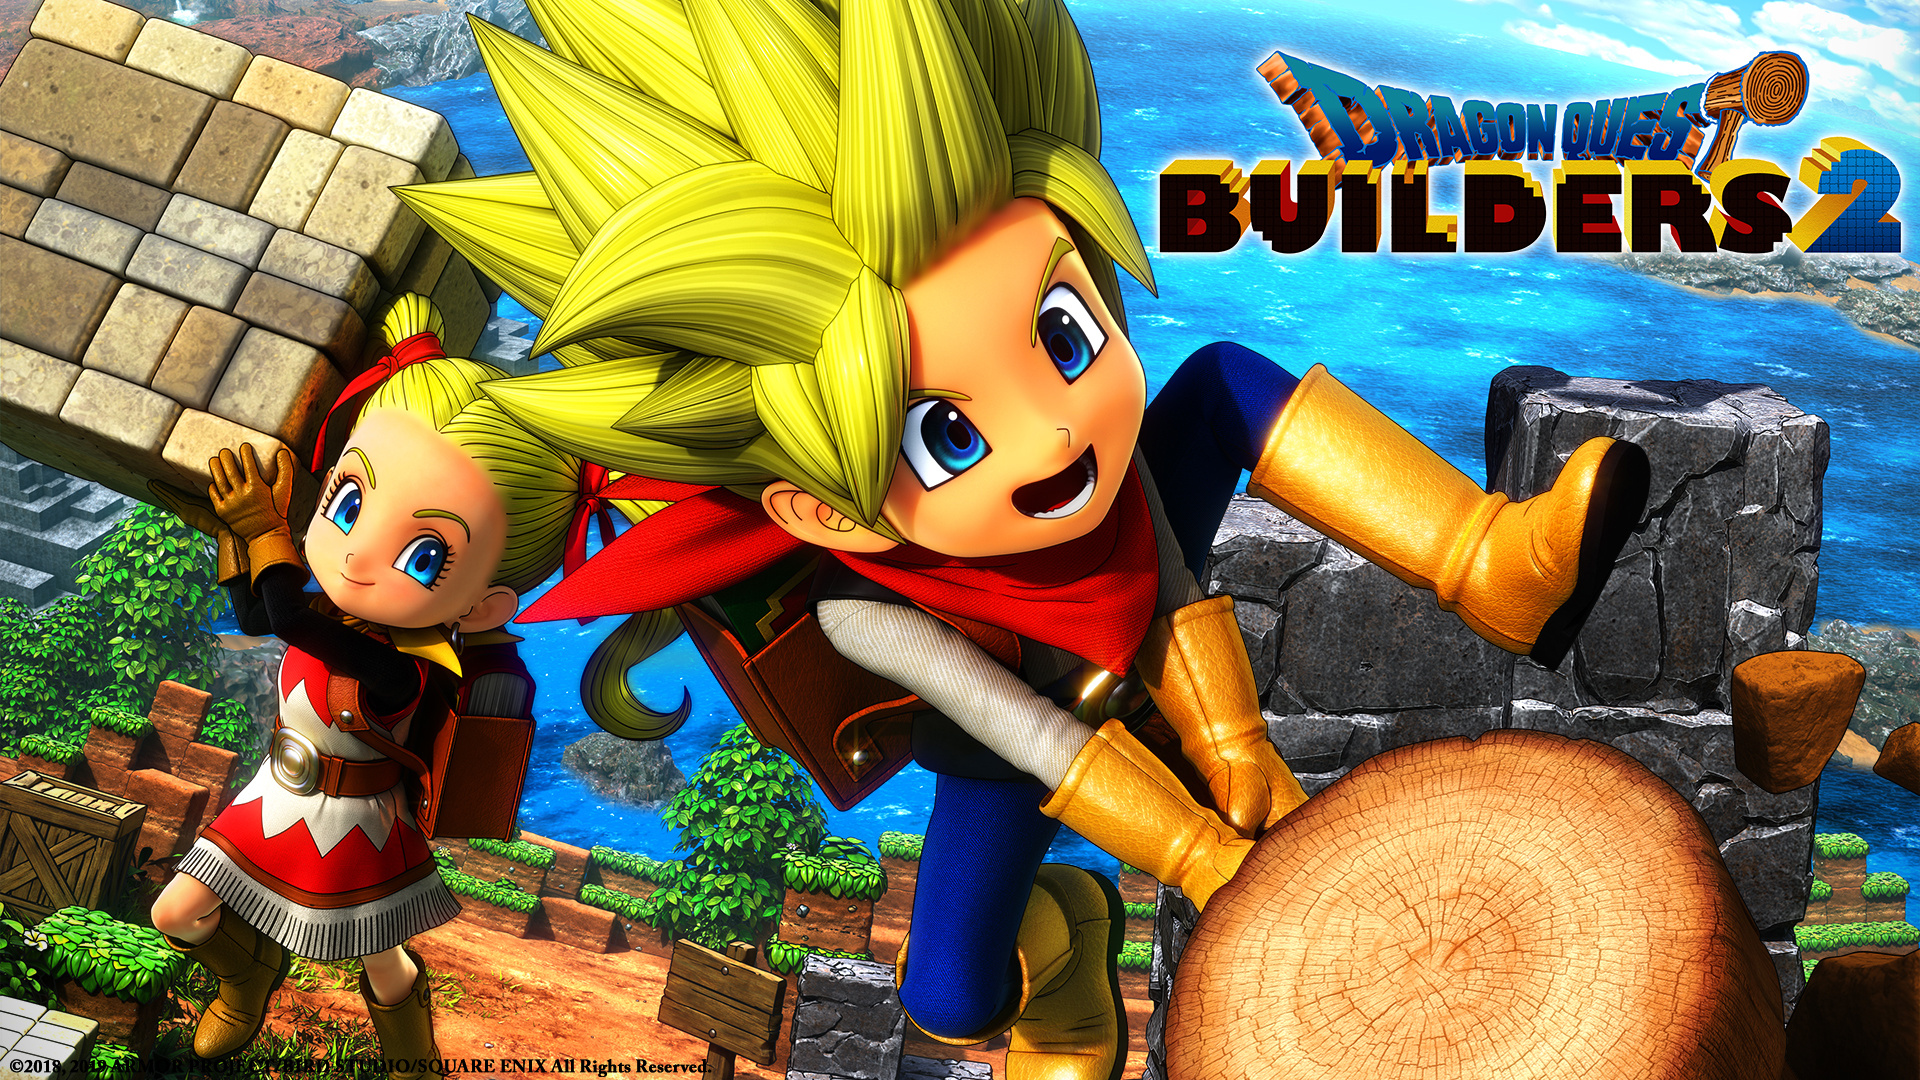 Square Enix Releases A Free Demo Of Dragon Quest Builders 2